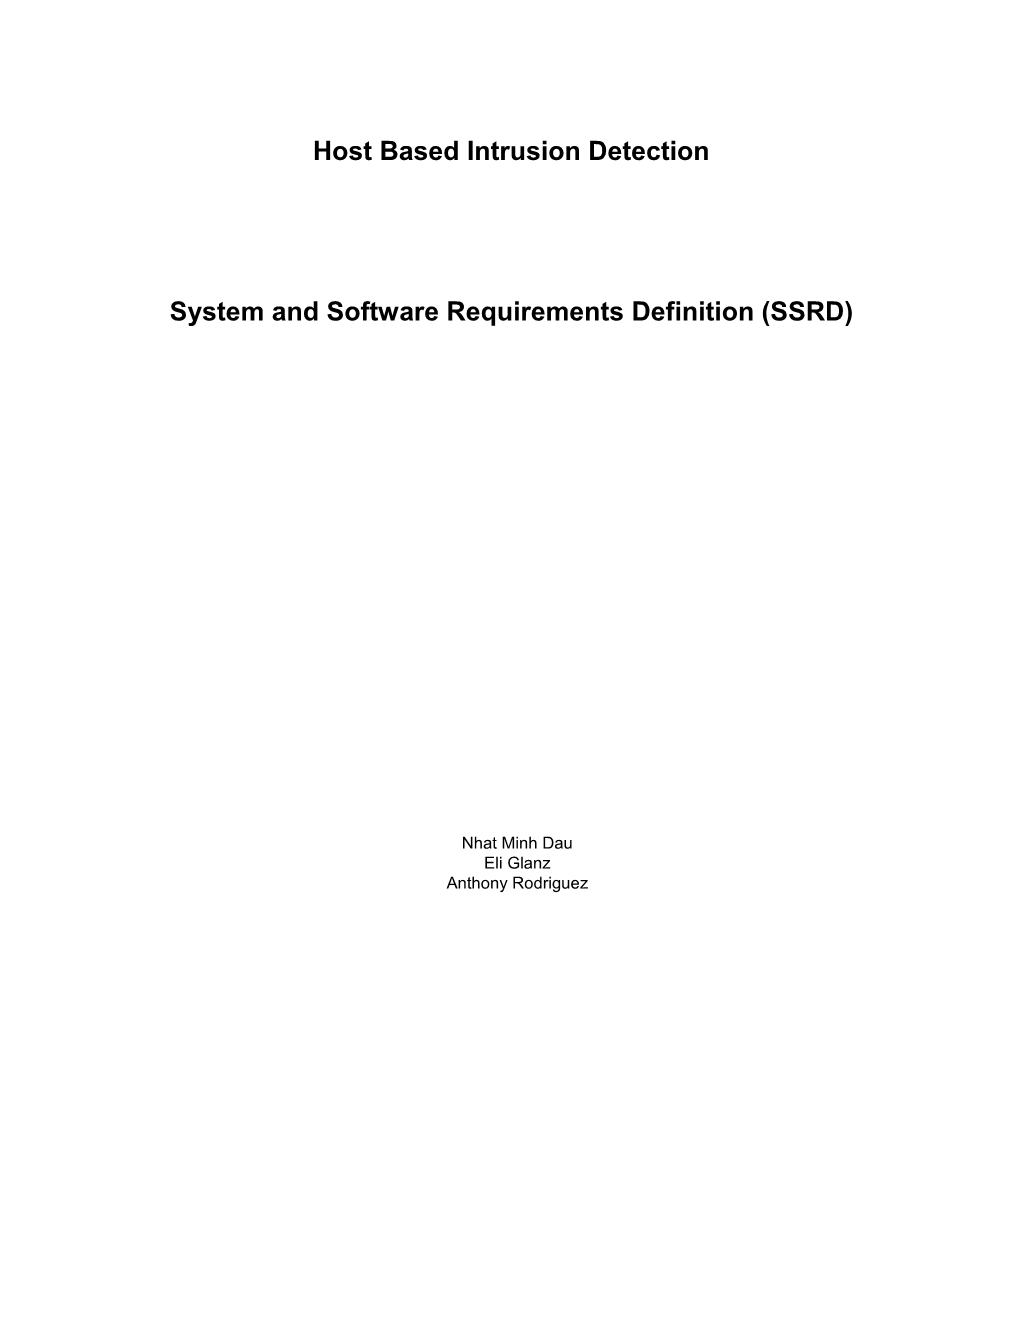 System And Software Requirements Definition